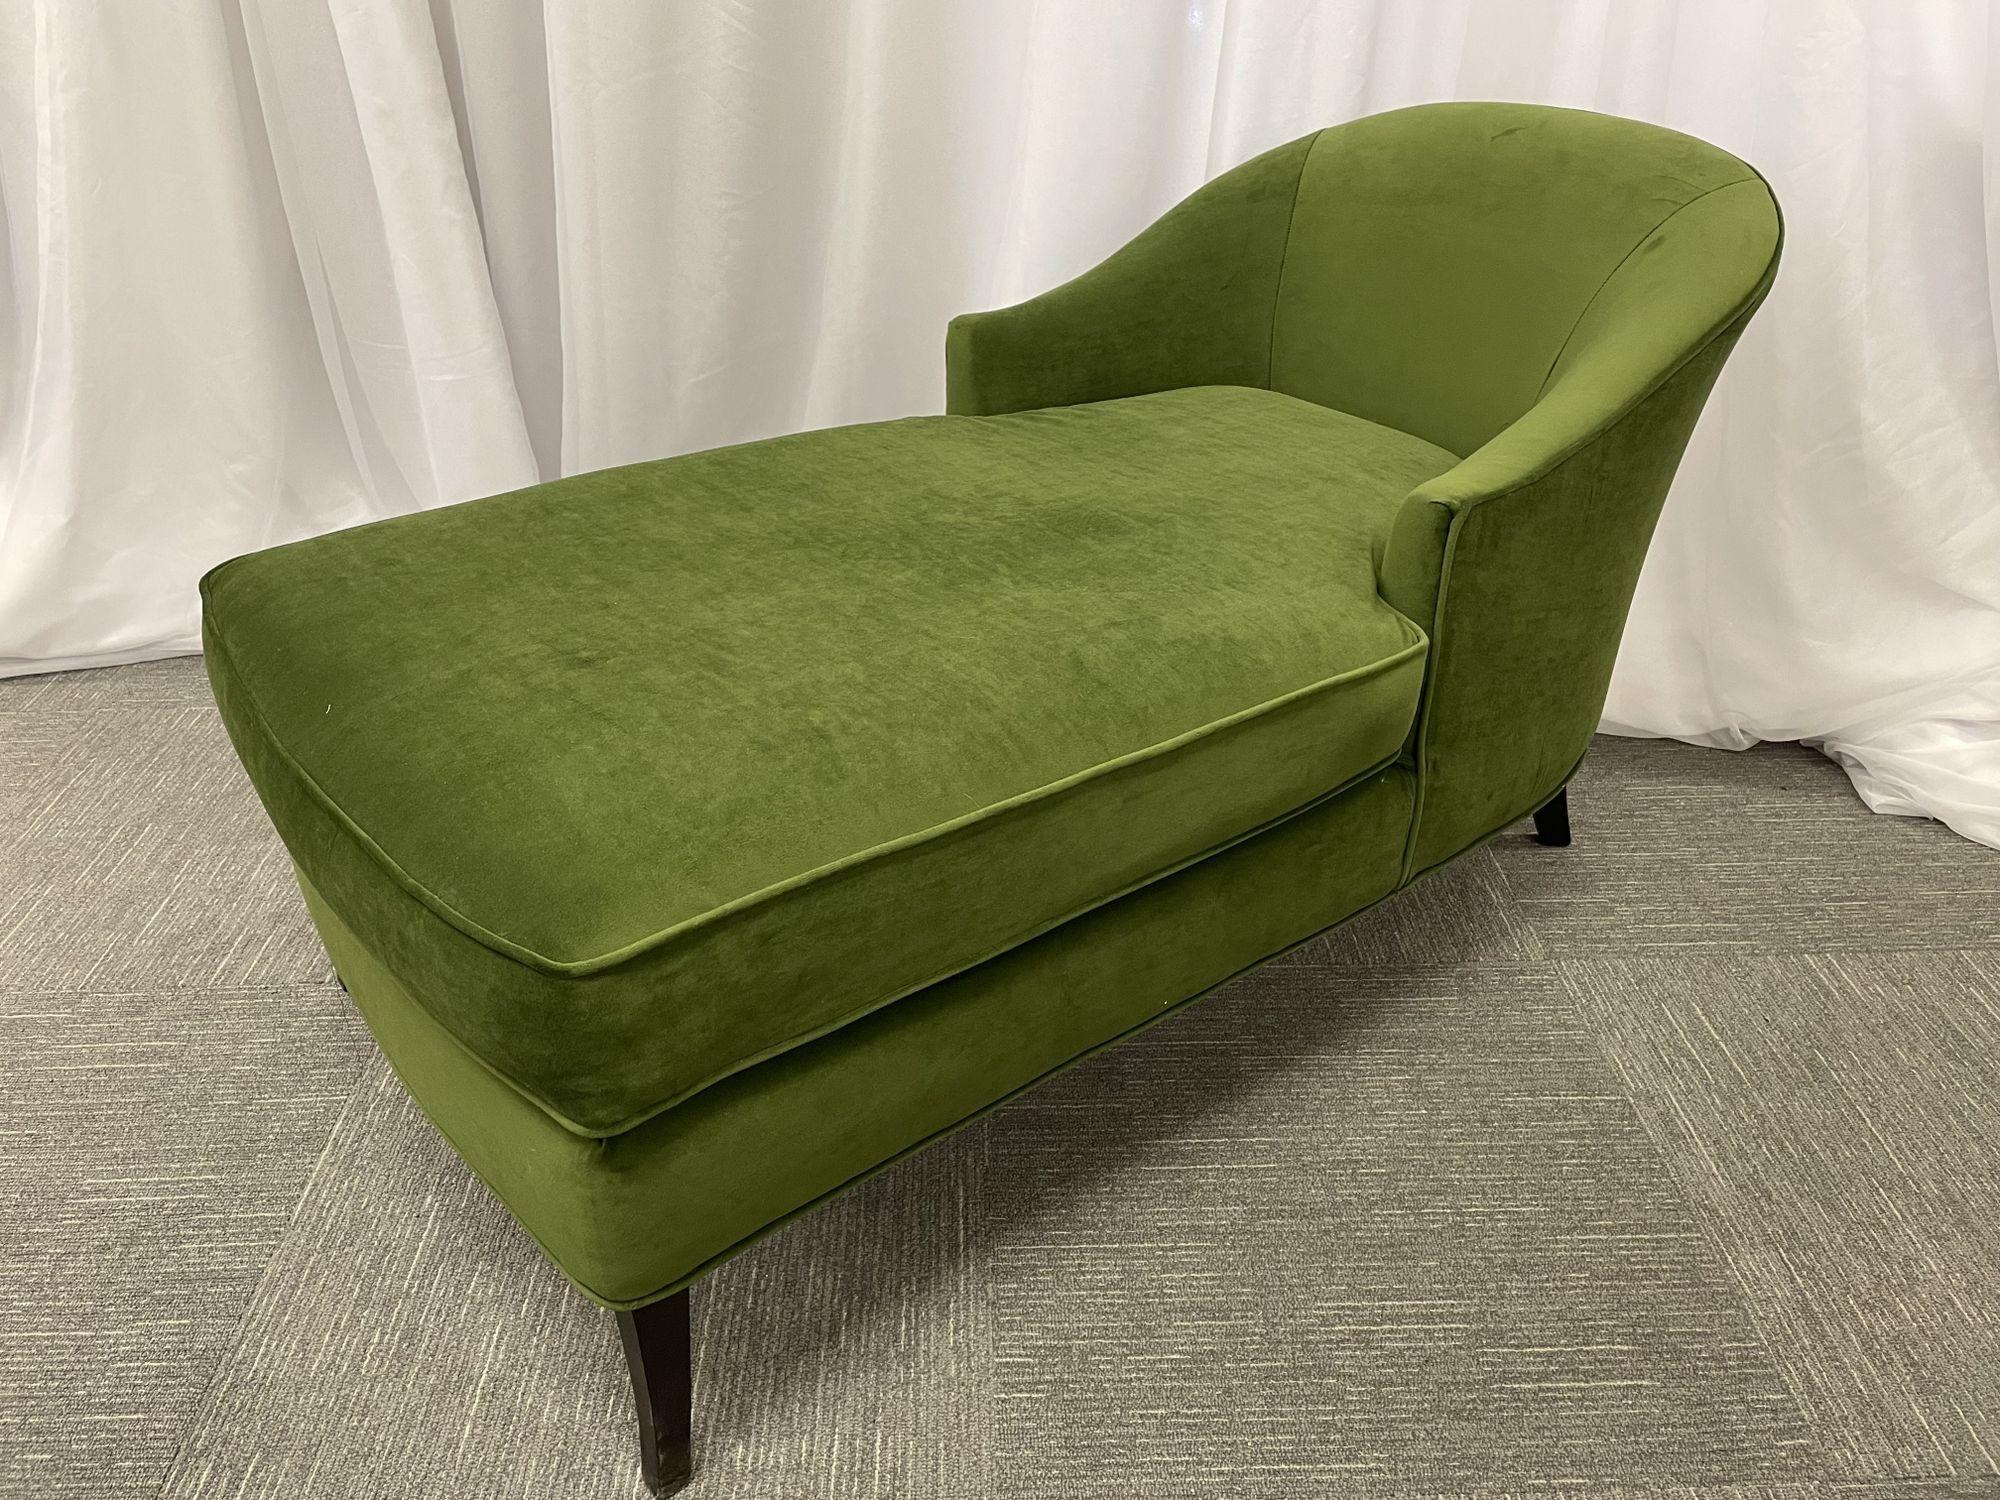 Mid-Century Modern Style American Designer Chaise / Daybed / Lounge, Green.
 
A very comfortable Green Upholstery on Ebony Wood legs in a sleek and stylish design. 
United States, 1970s
 
Seat height: 20 inches
 
Other American designers of